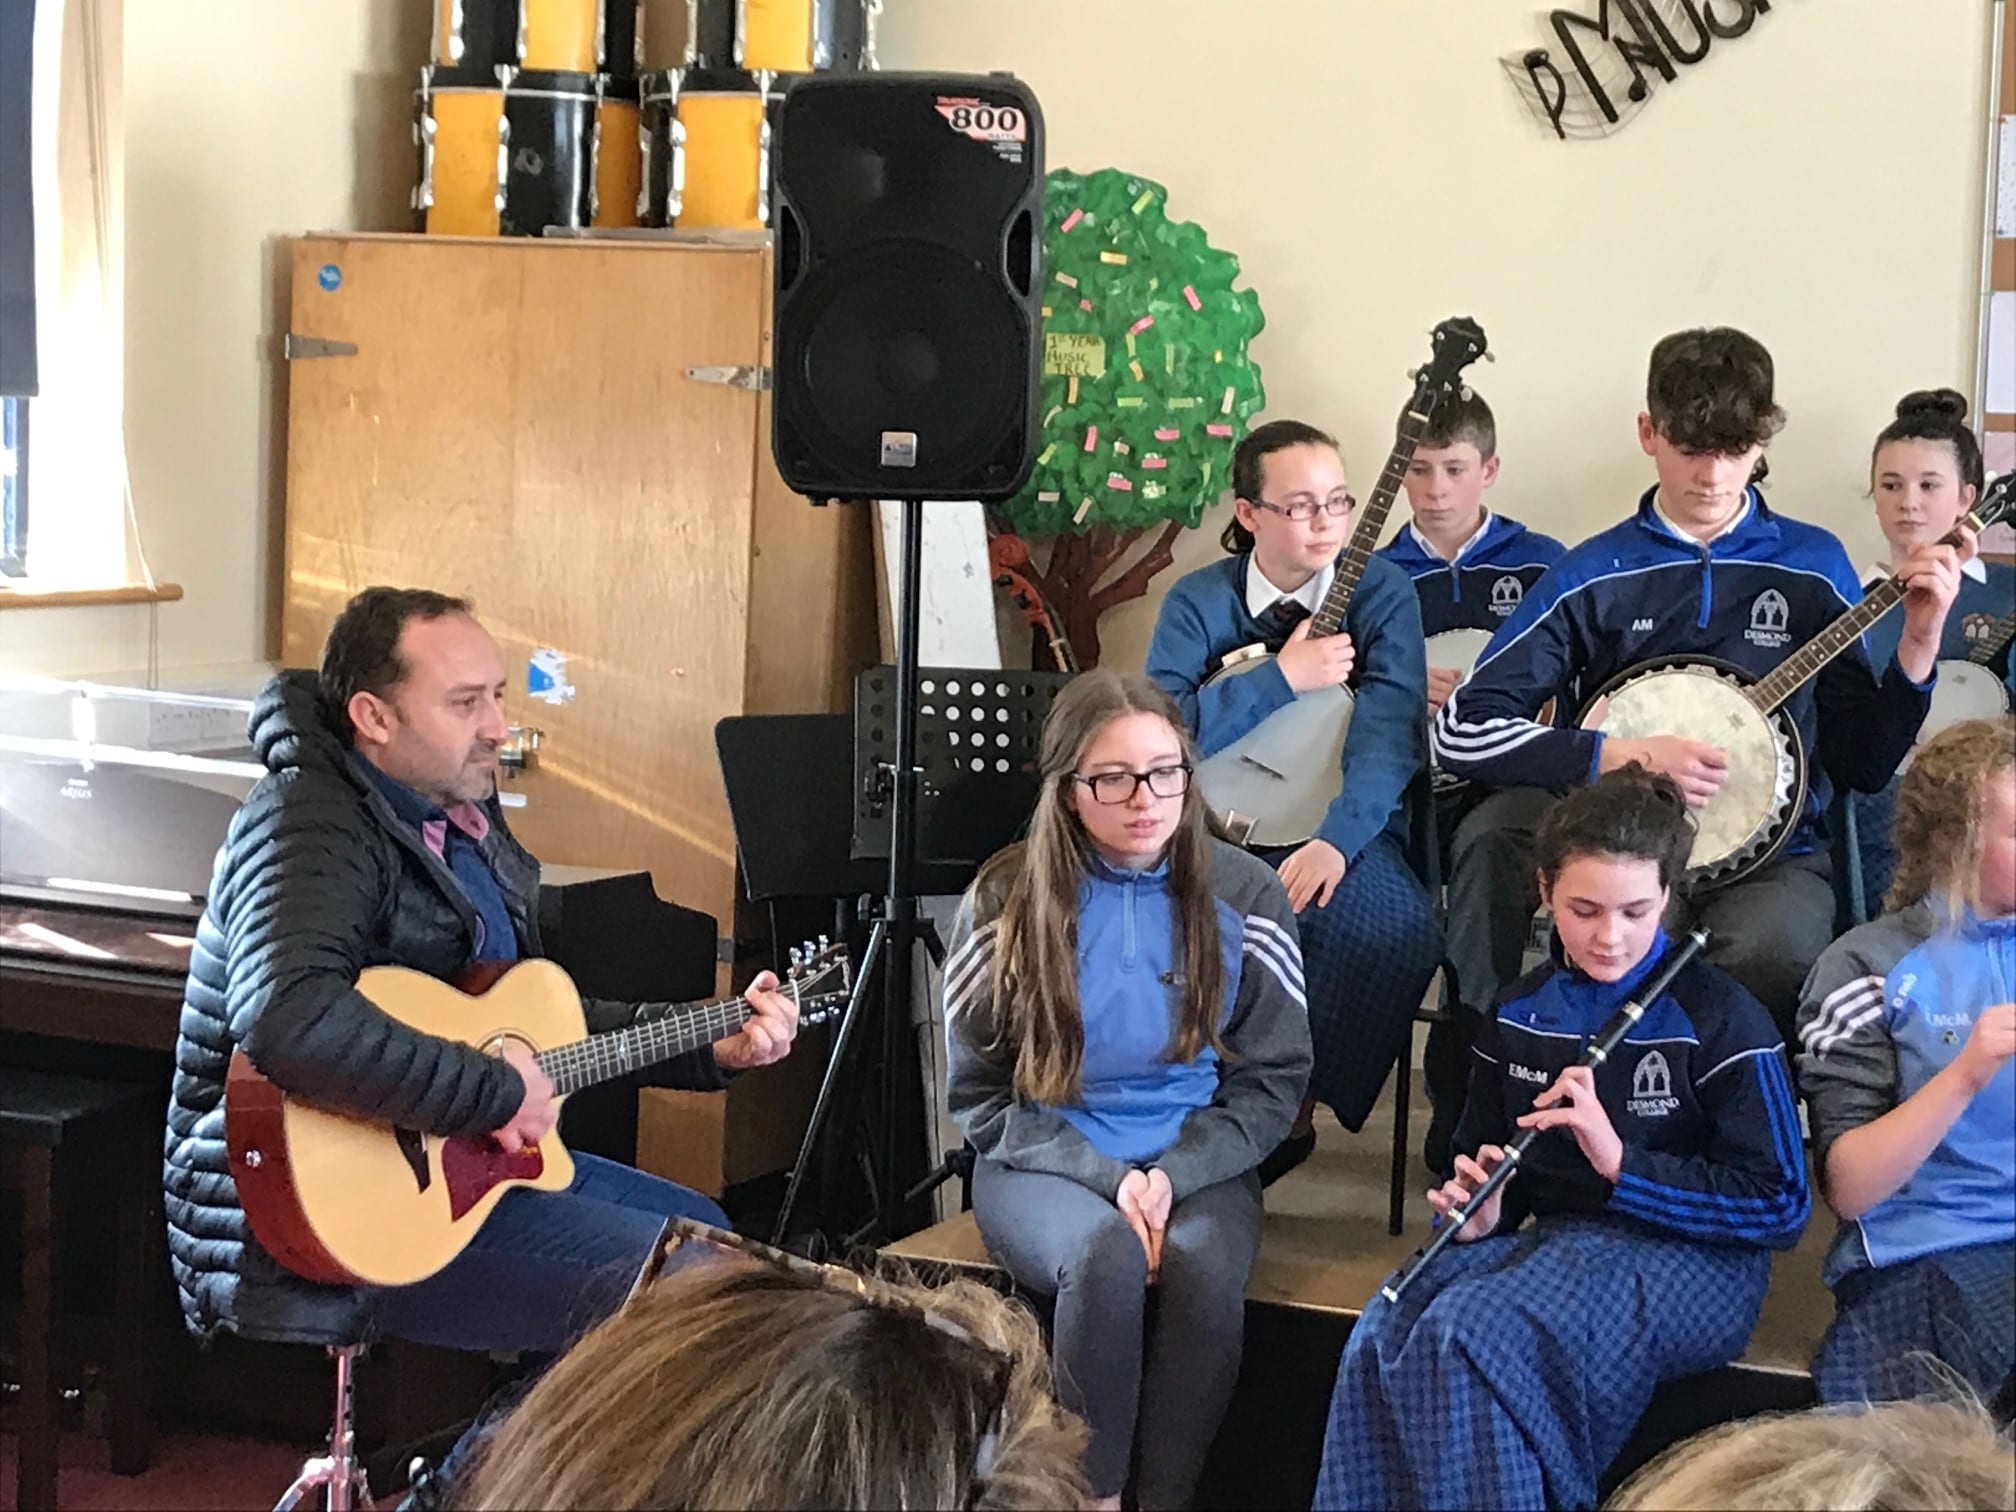 Mr José Goterris Carratalá (music teacher from Spain) playing some Irish trad music with students from Desmond College on his visit to the school as part of a European Erasmus Programme.